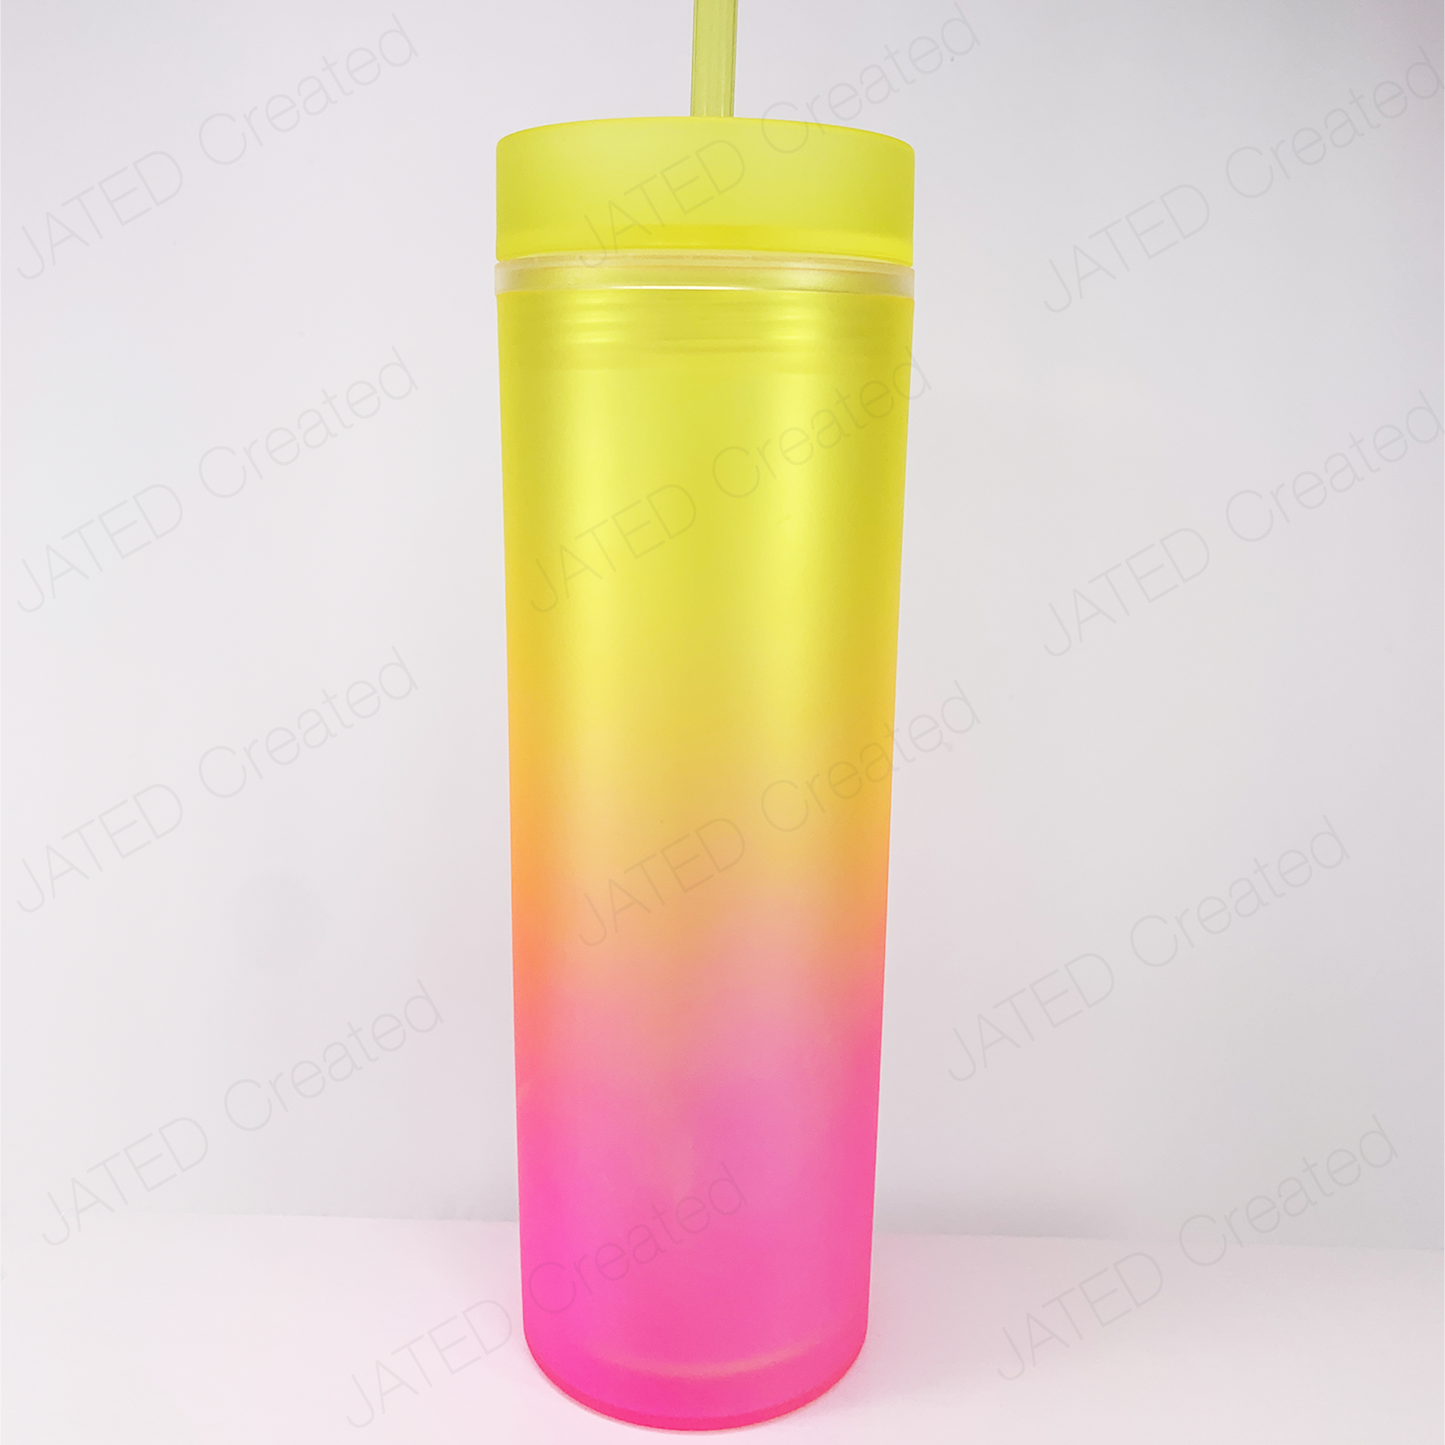 16 oz Yellow Frosted Acrylic Tumblers